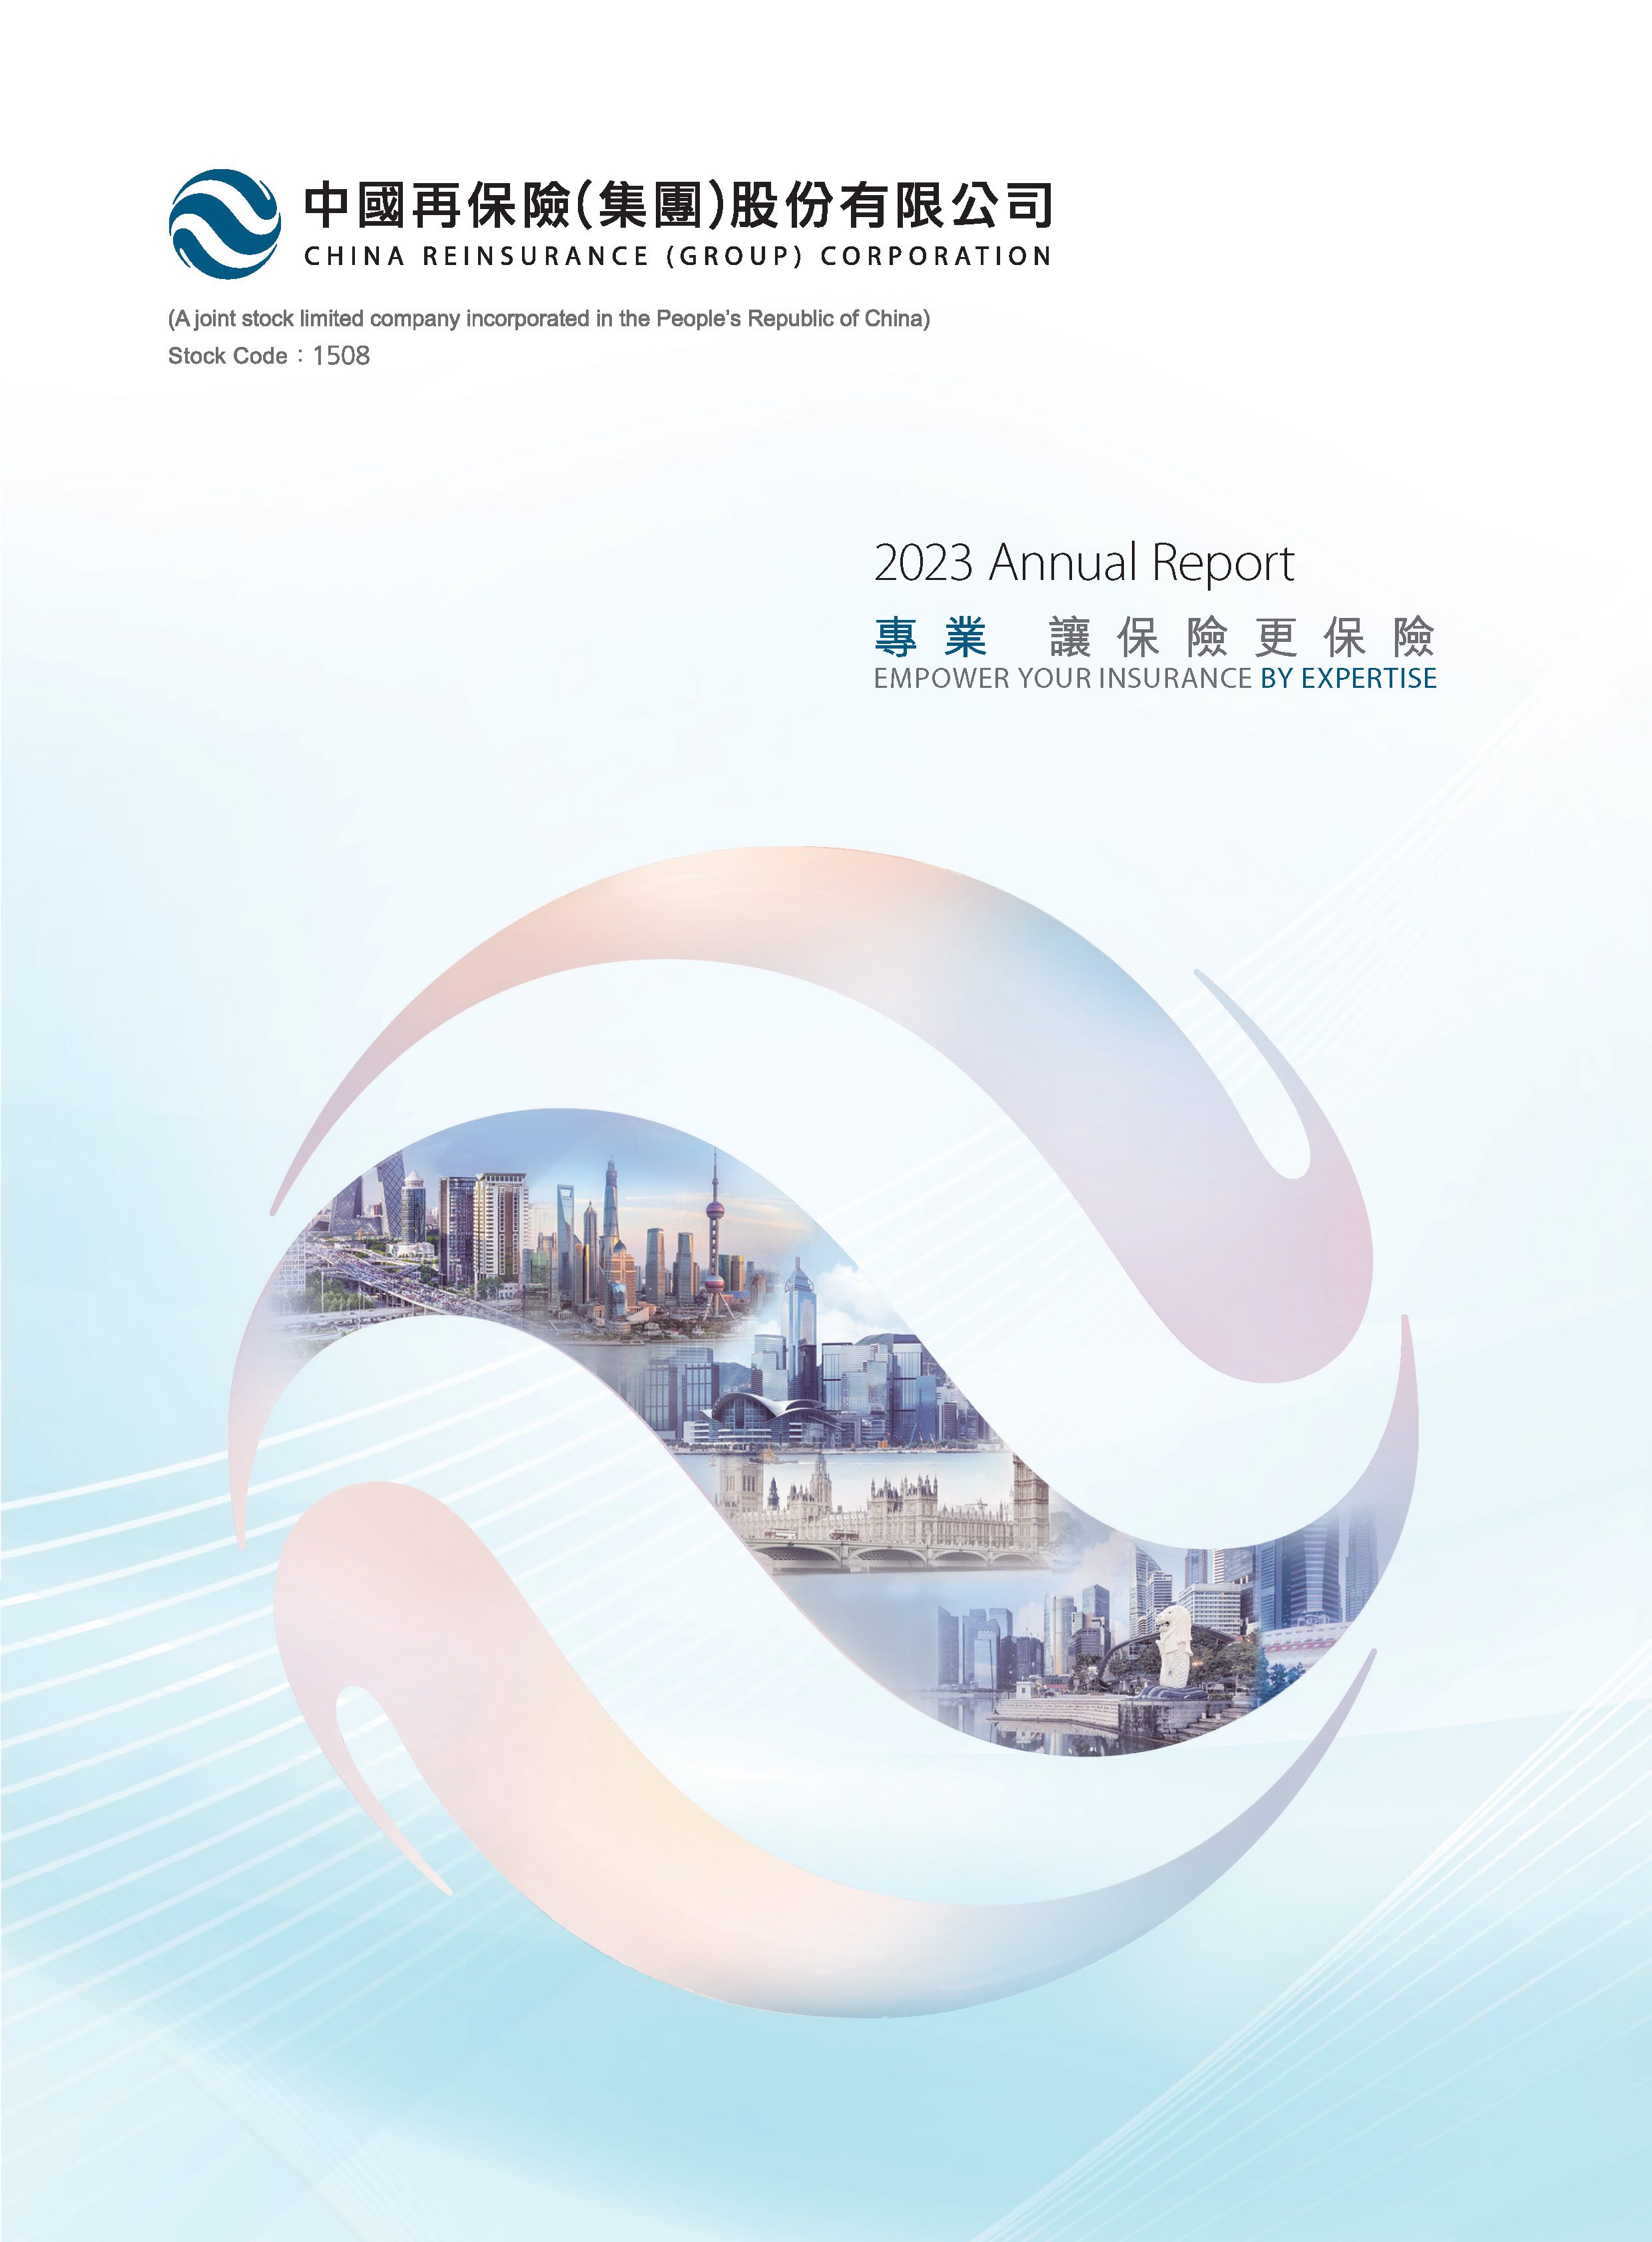 China Reinsurance (Group) Corporation 2023 Annual Report